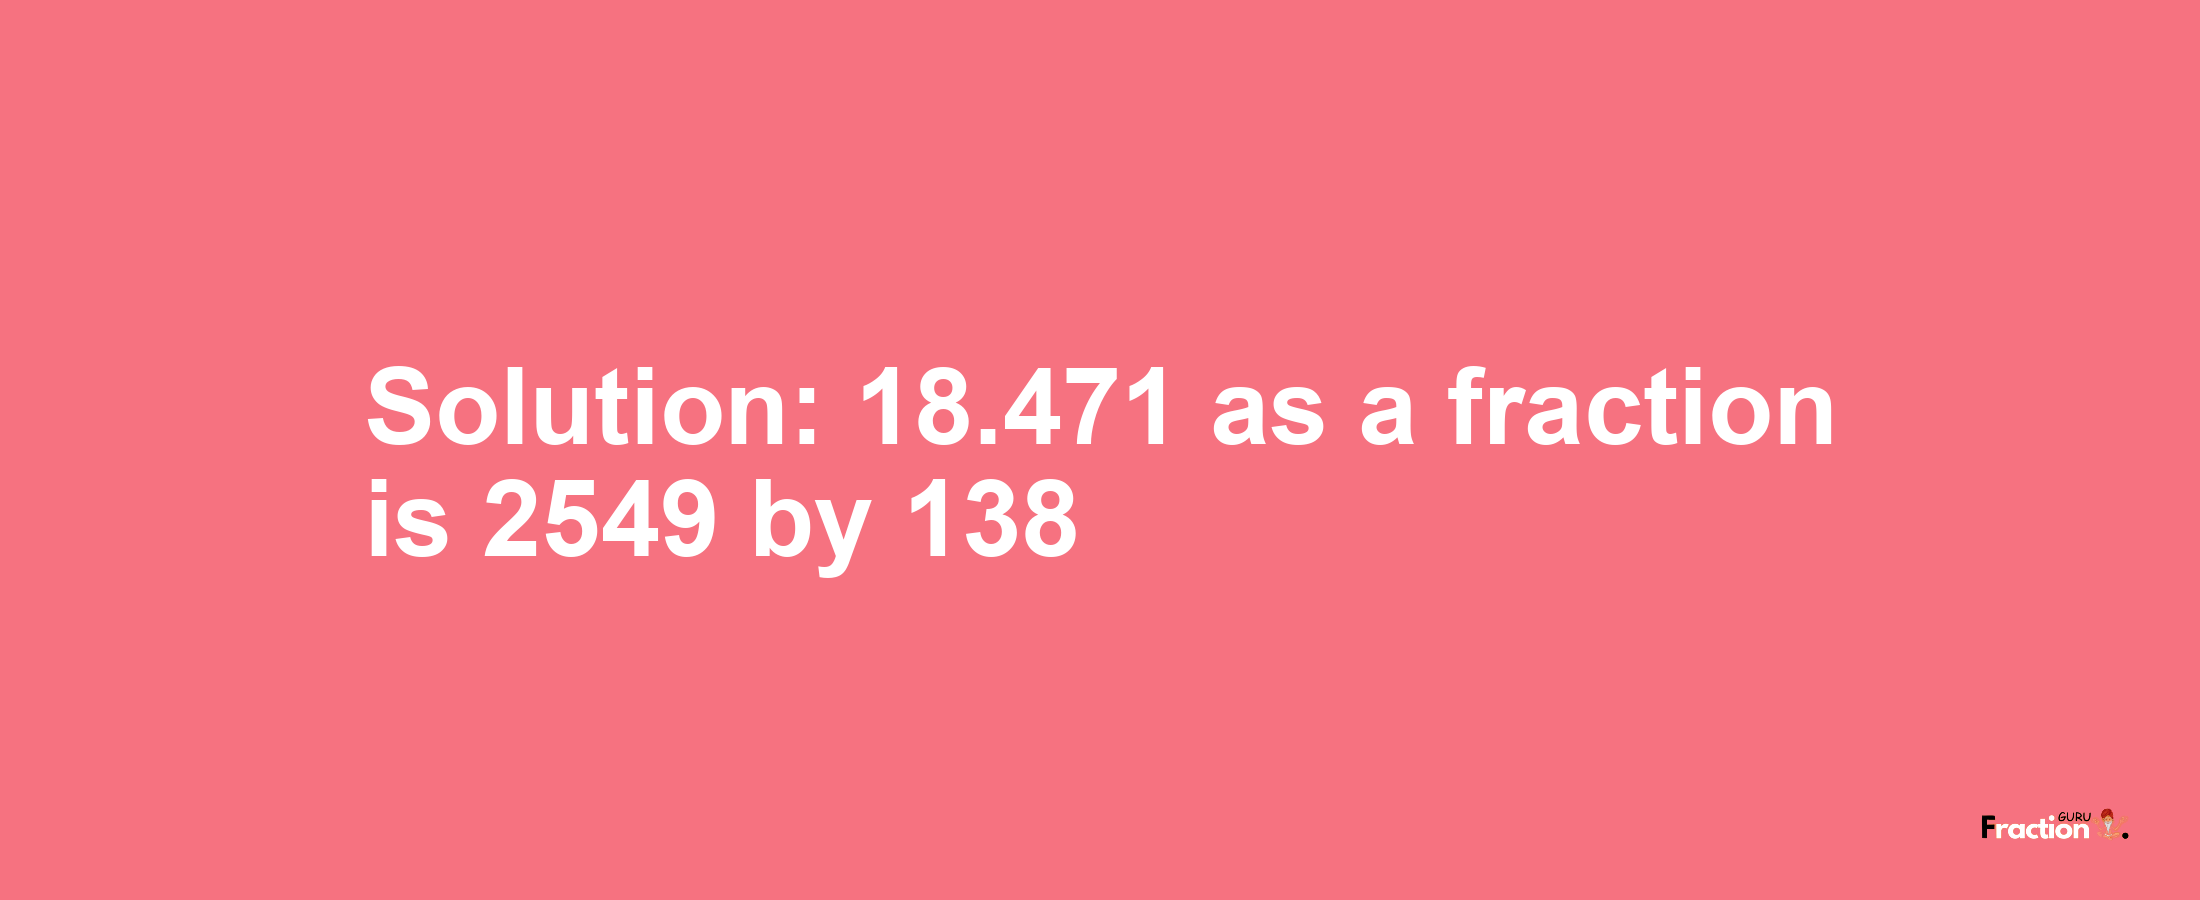 Solution:18.471 as a fraction is 2549/138